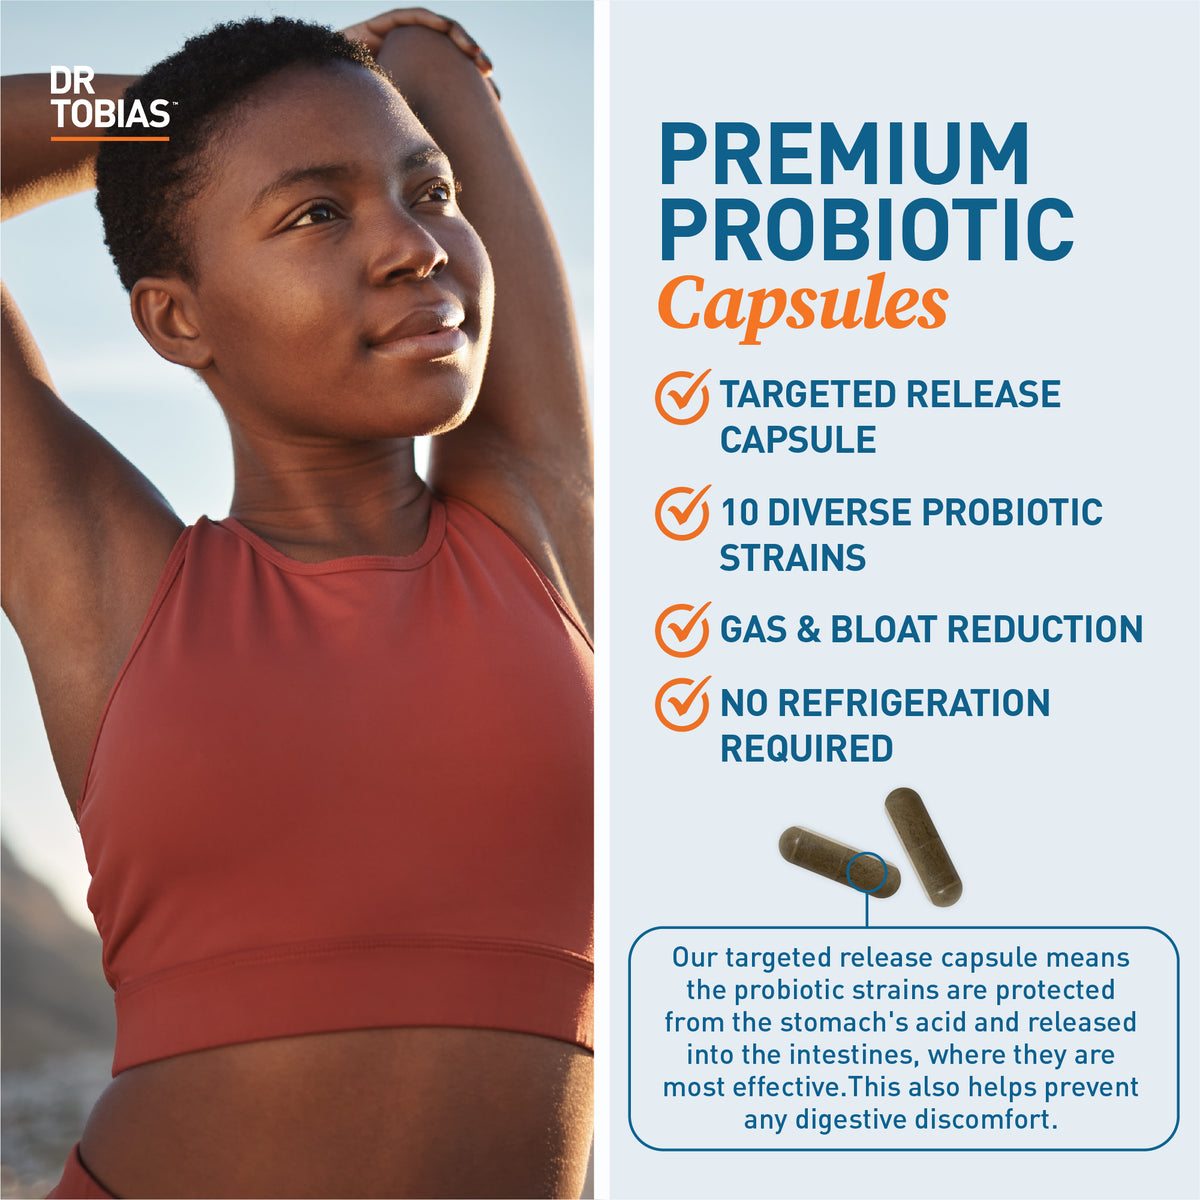 premium probiotic capsules that are targeted release, include 10 diverse strains of probiotics, support gas and blot reduction and do not require refrigeration. 